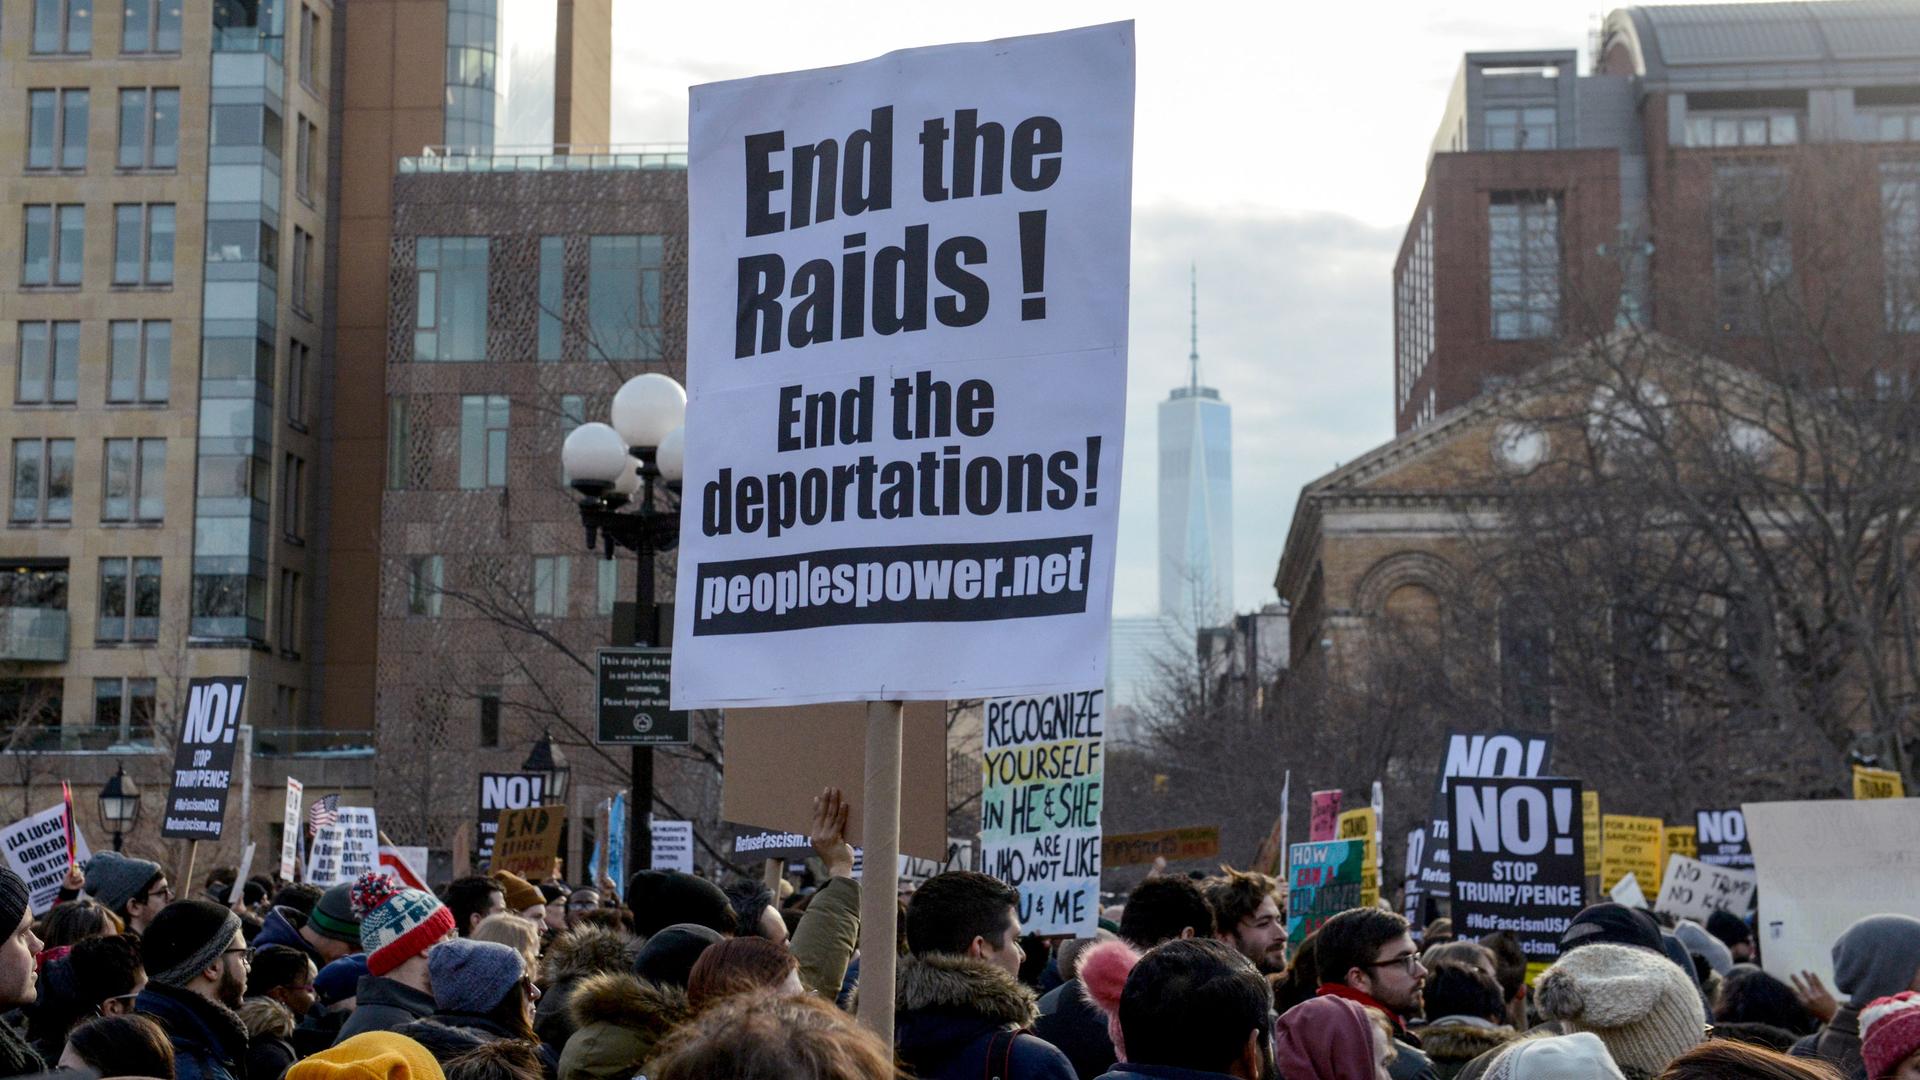 A sign at a February protest in New York calls for an end to immigration raids and deportations.